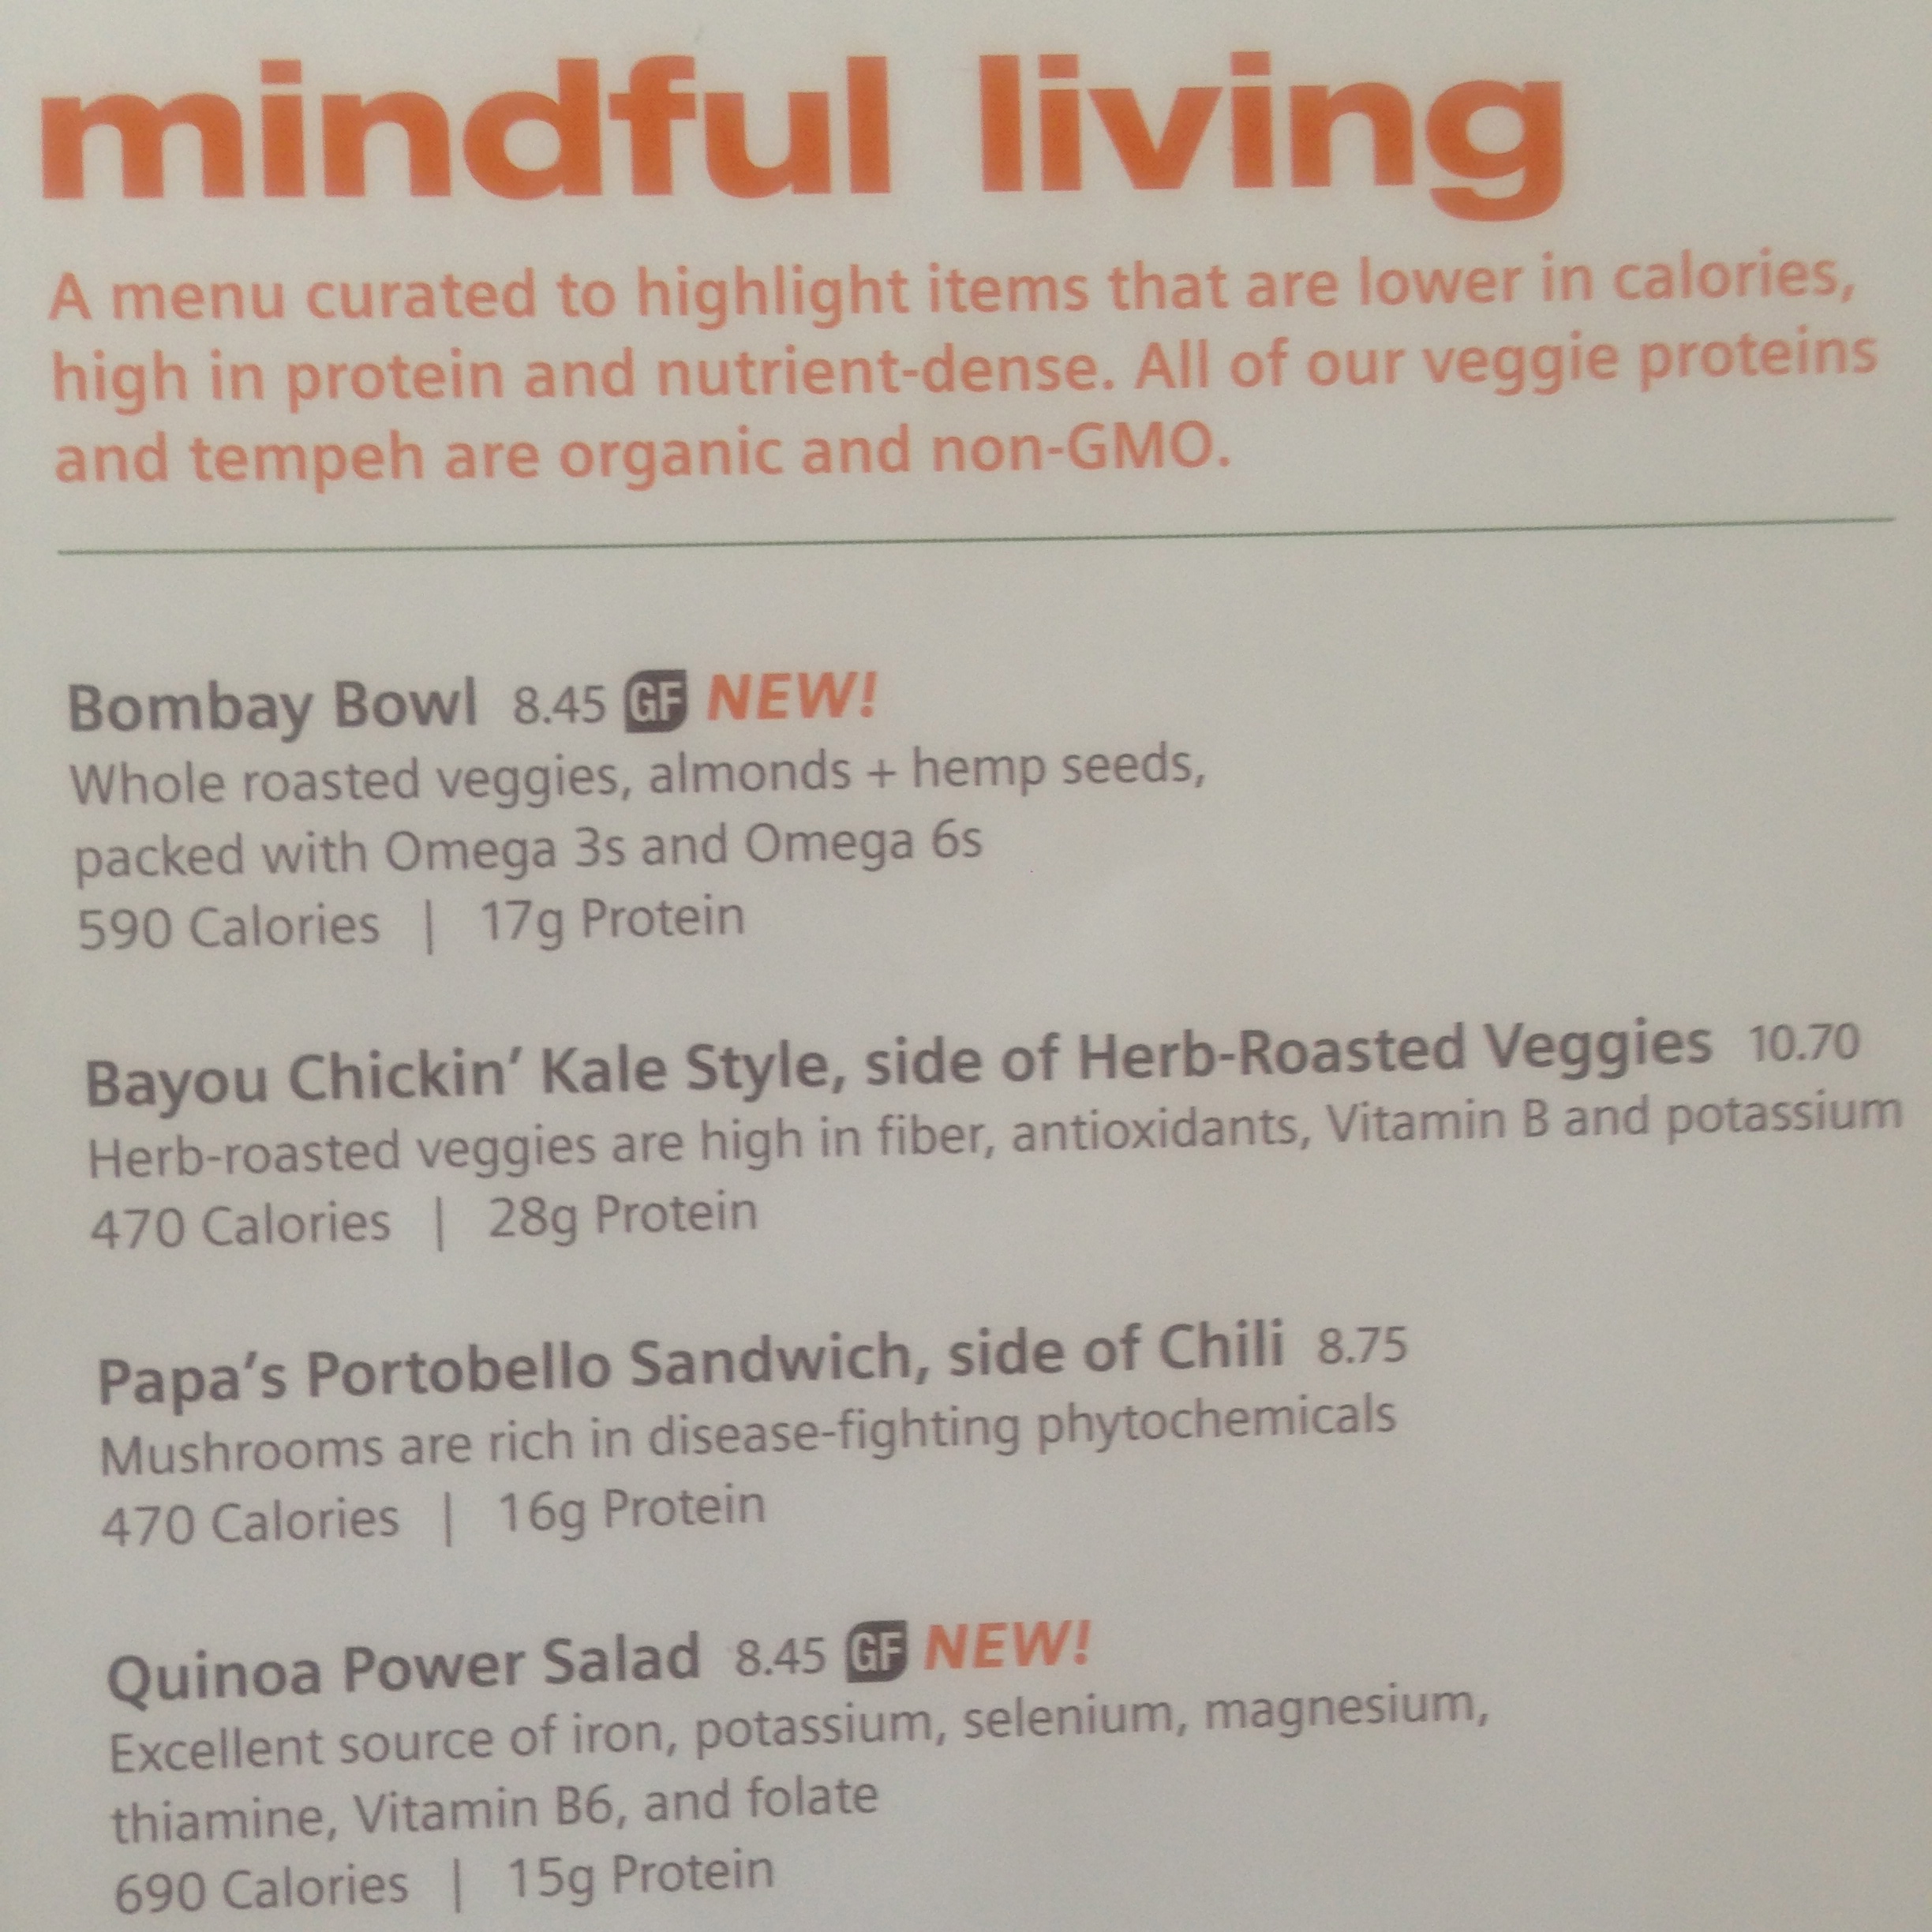 Where can you find out how many calories are in Veggie Grill foods?